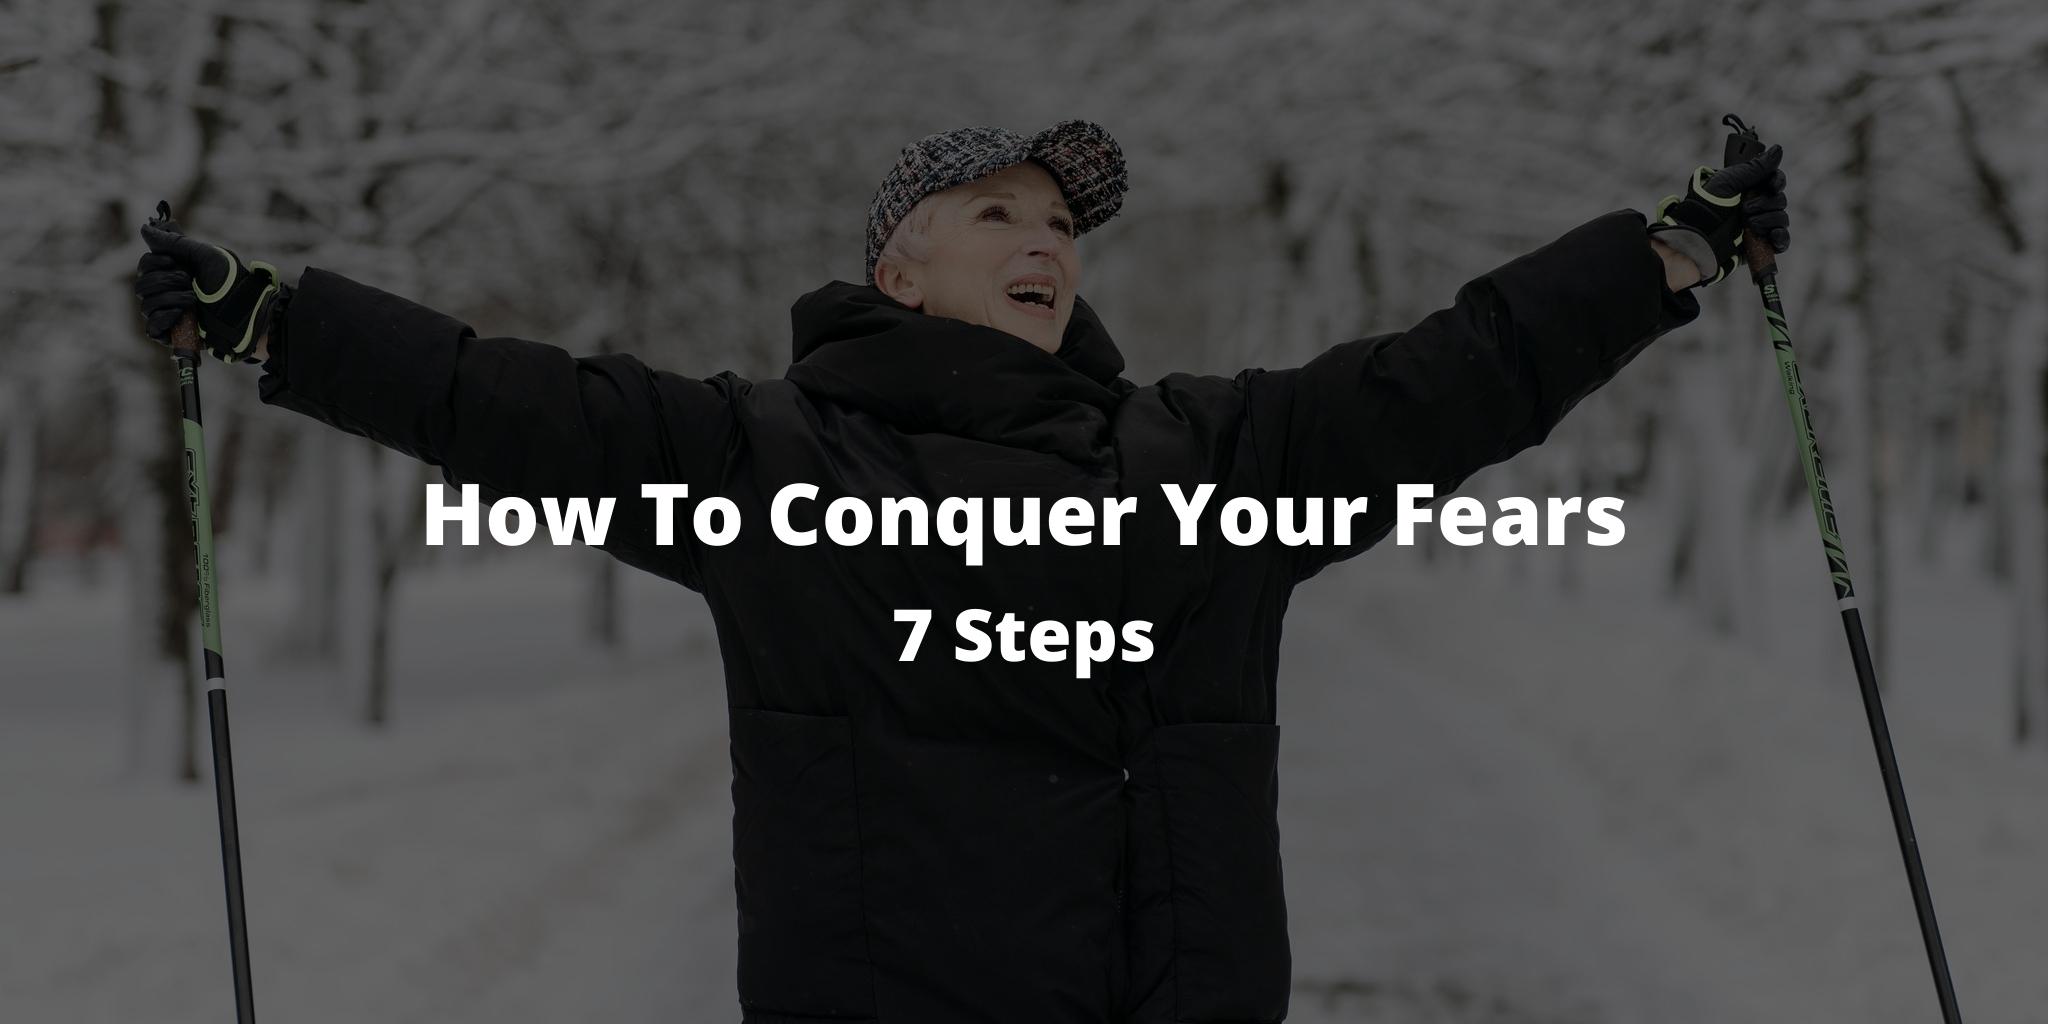 How To Conquer Your Fears: 7 Steps